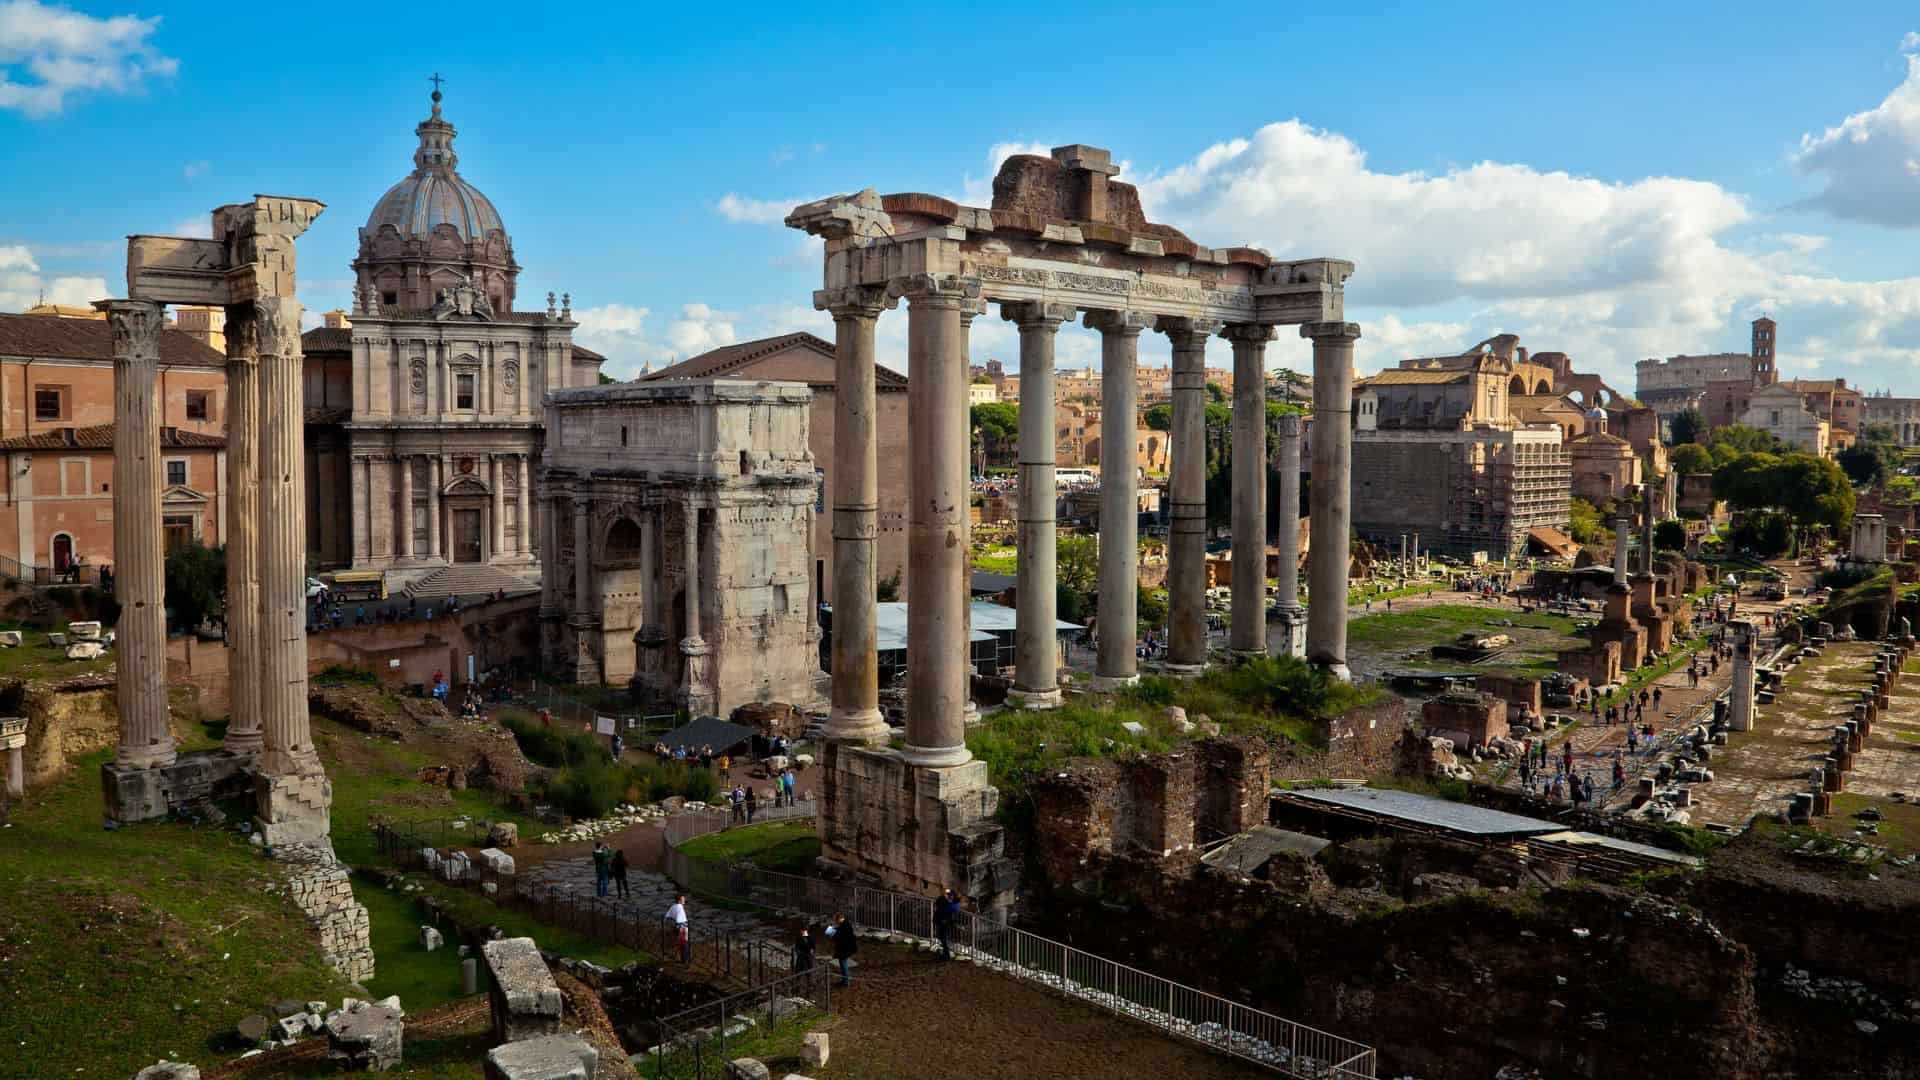 A view of the Roman Forum from above.